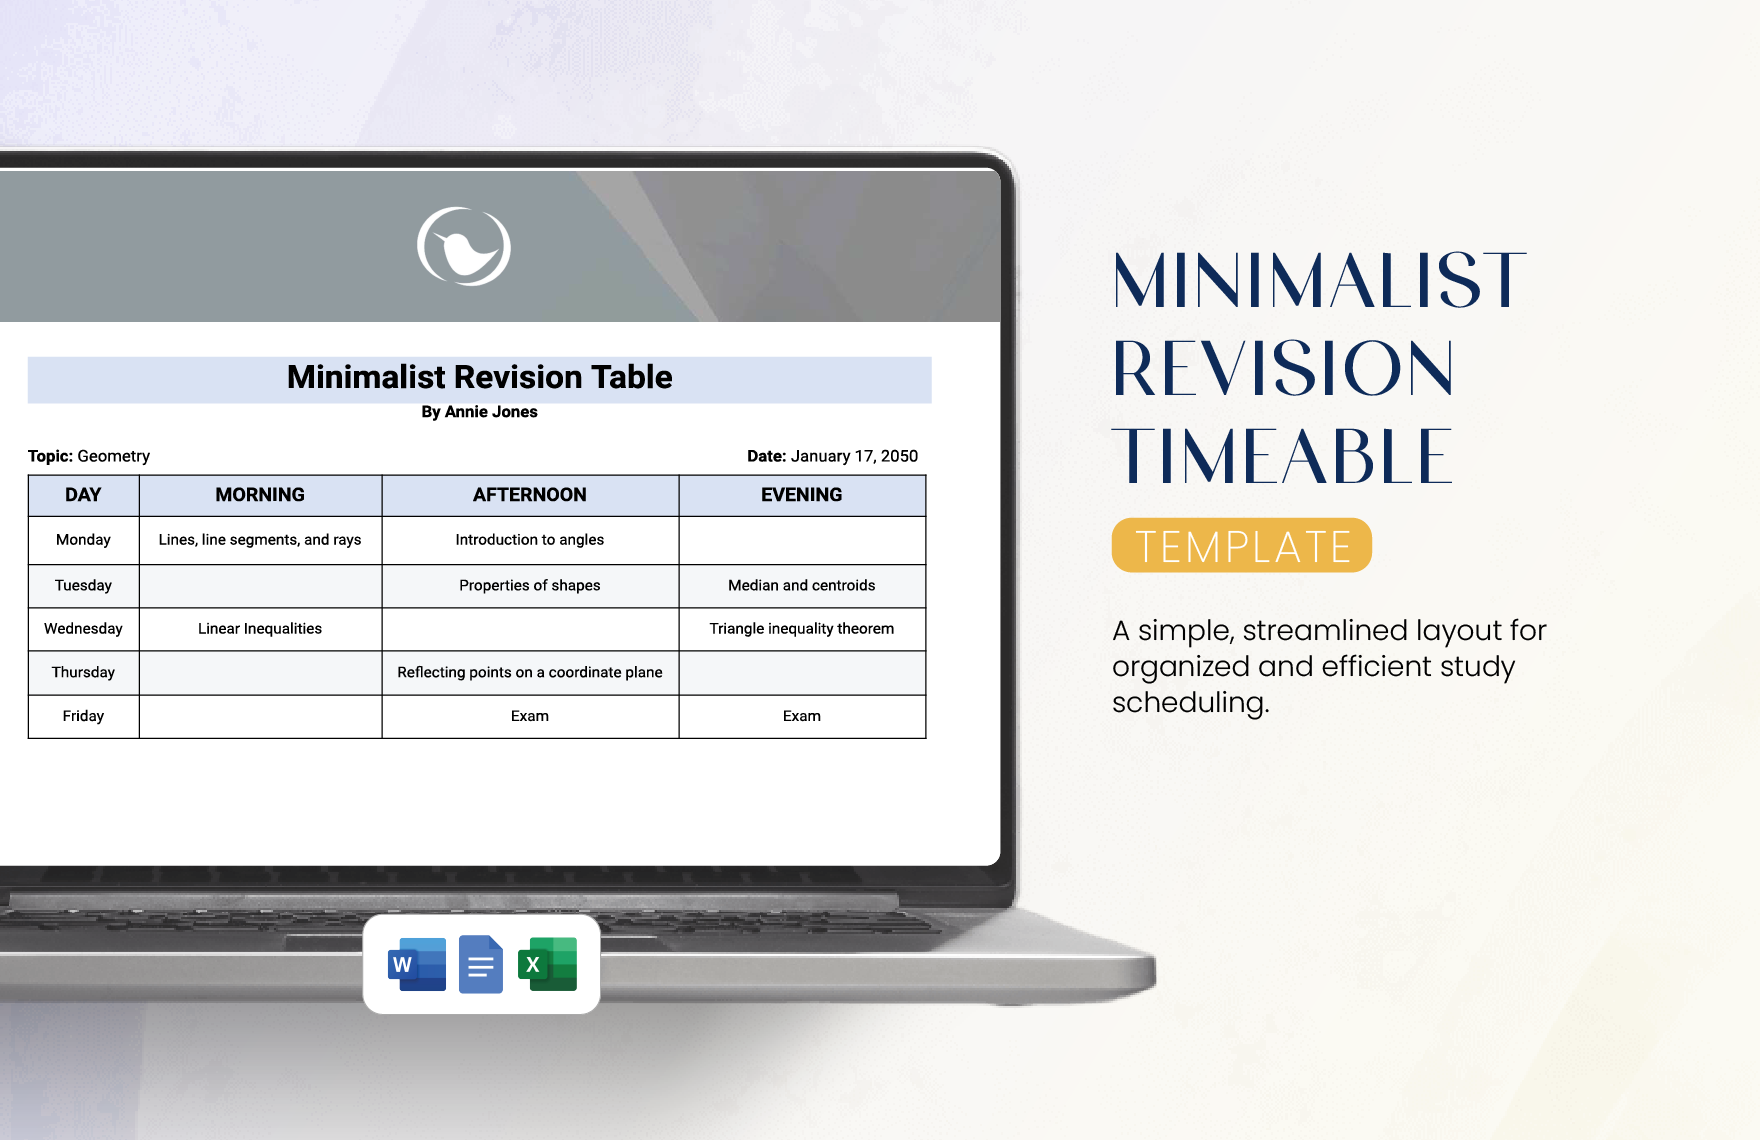 Minimalist Revision Timetable Template in Word, Google Docs, Excel